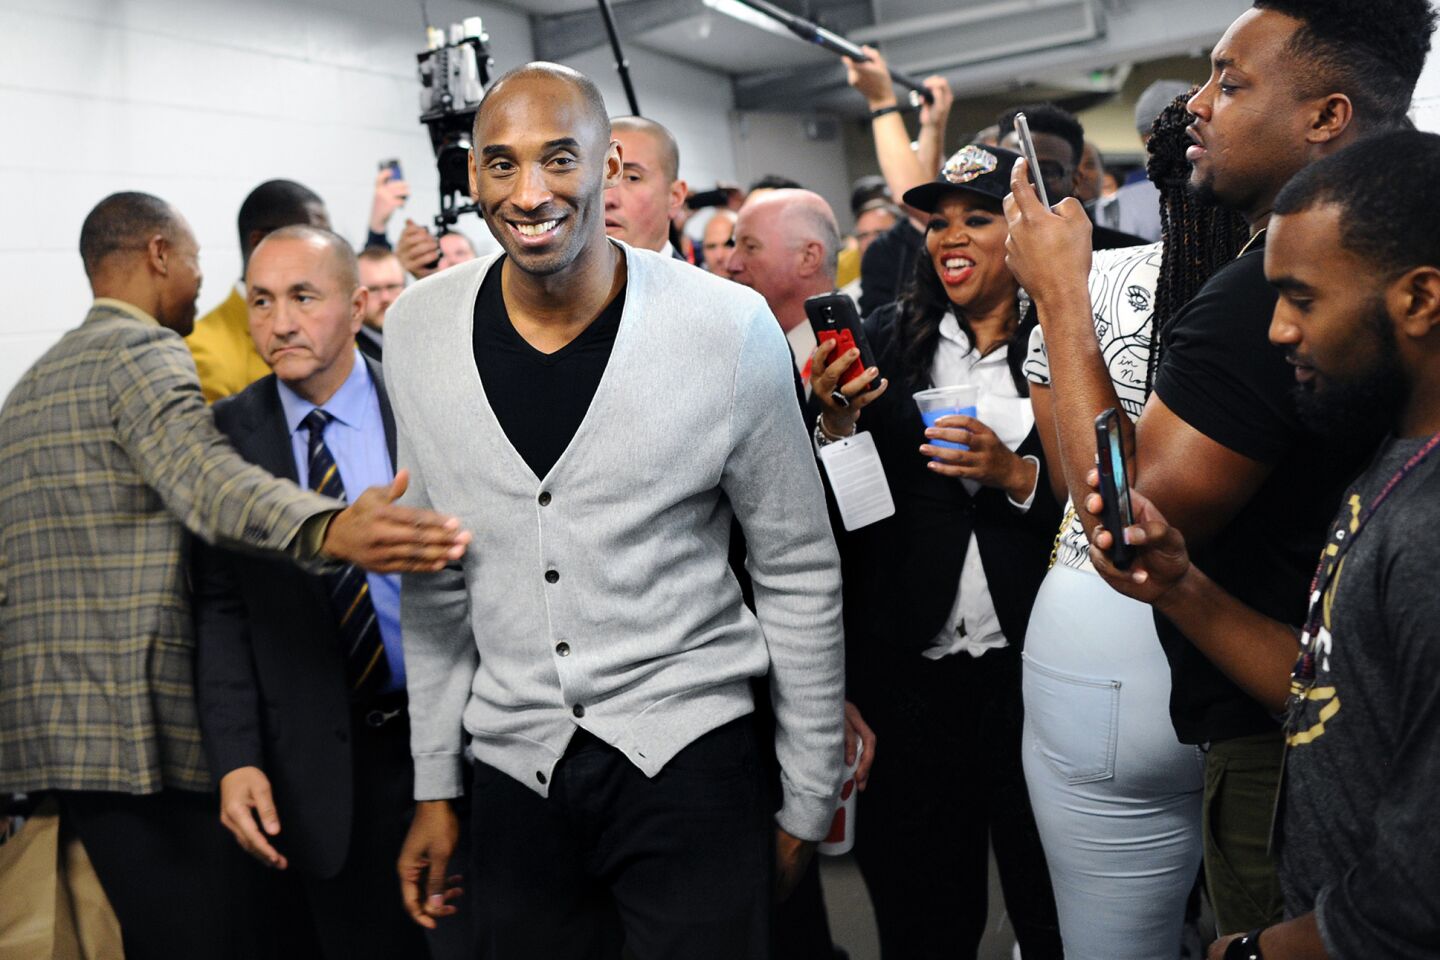 Kobe Bryant walks down a hallway at Smoothie King Center after the Lakers' game against the Pelicans.